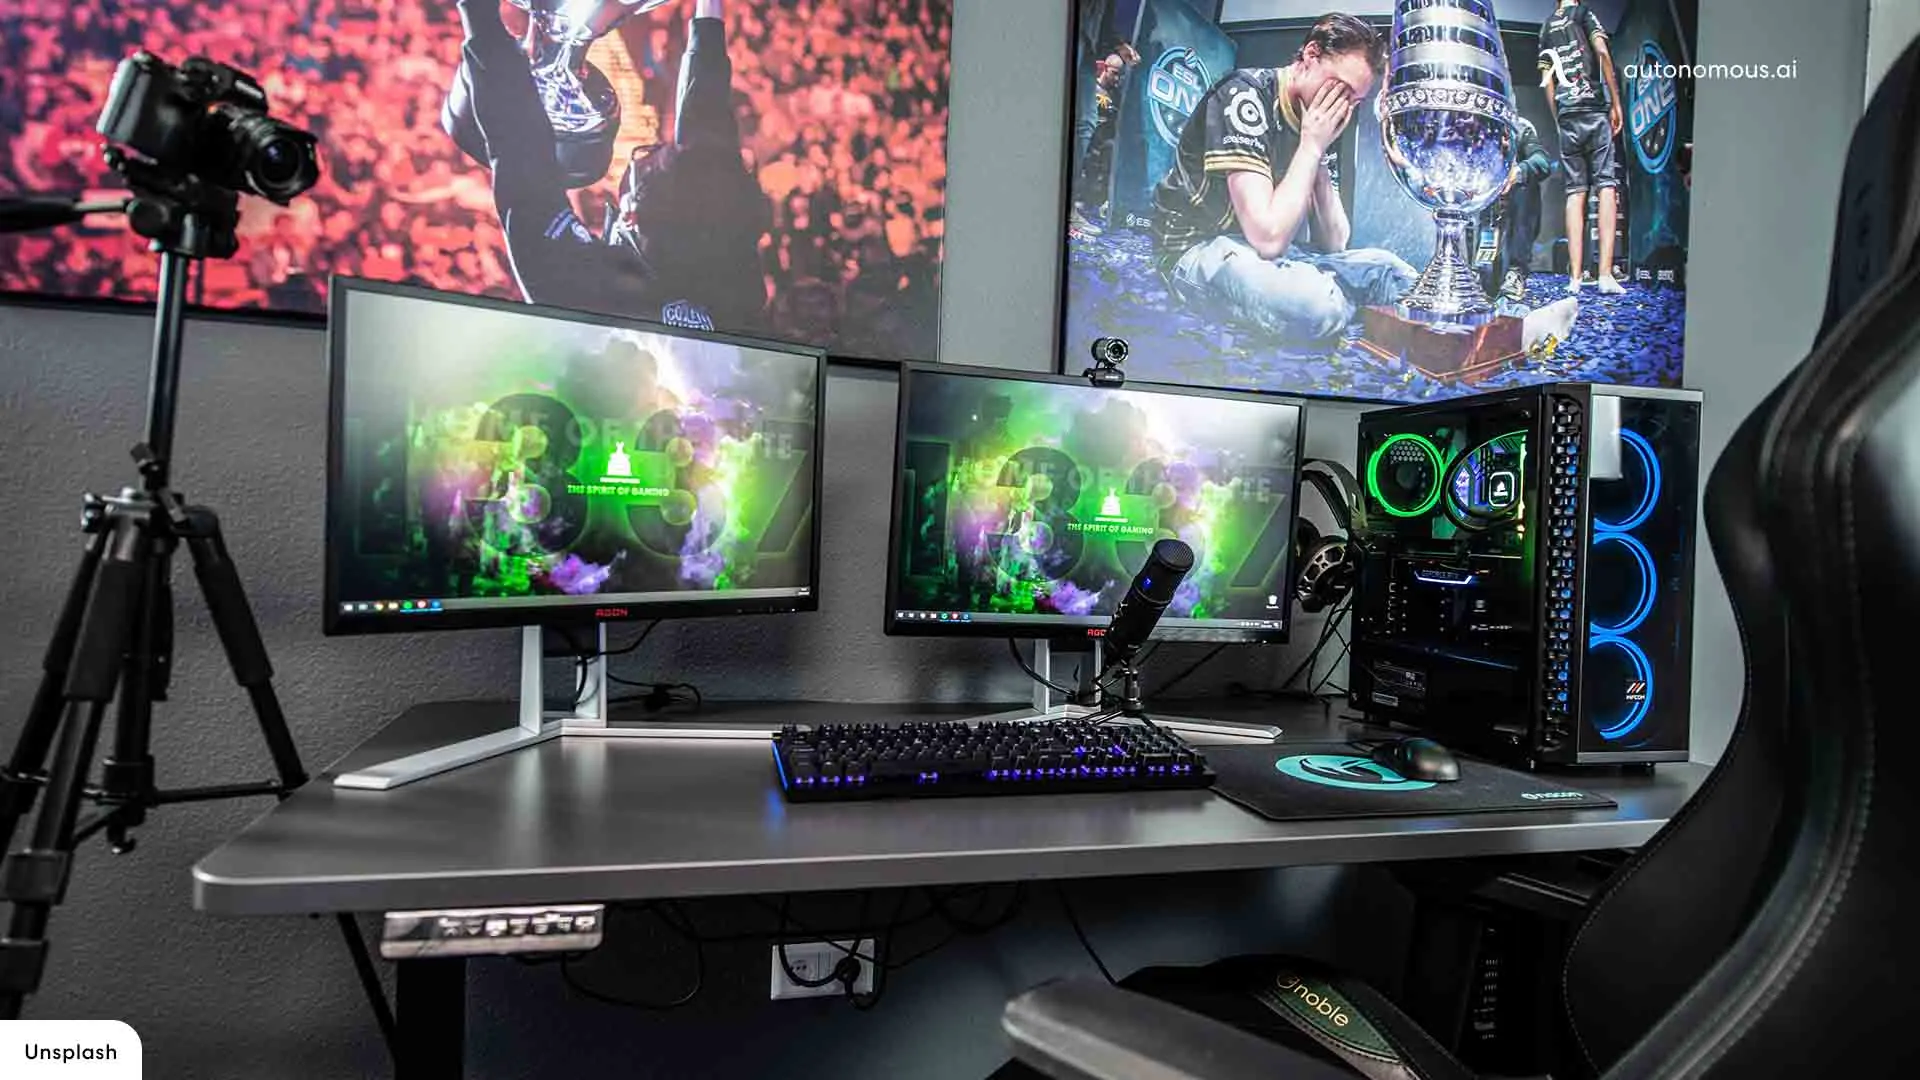 What Do Gamers Need to Pay Attention to When Buying a Gaming Desk?